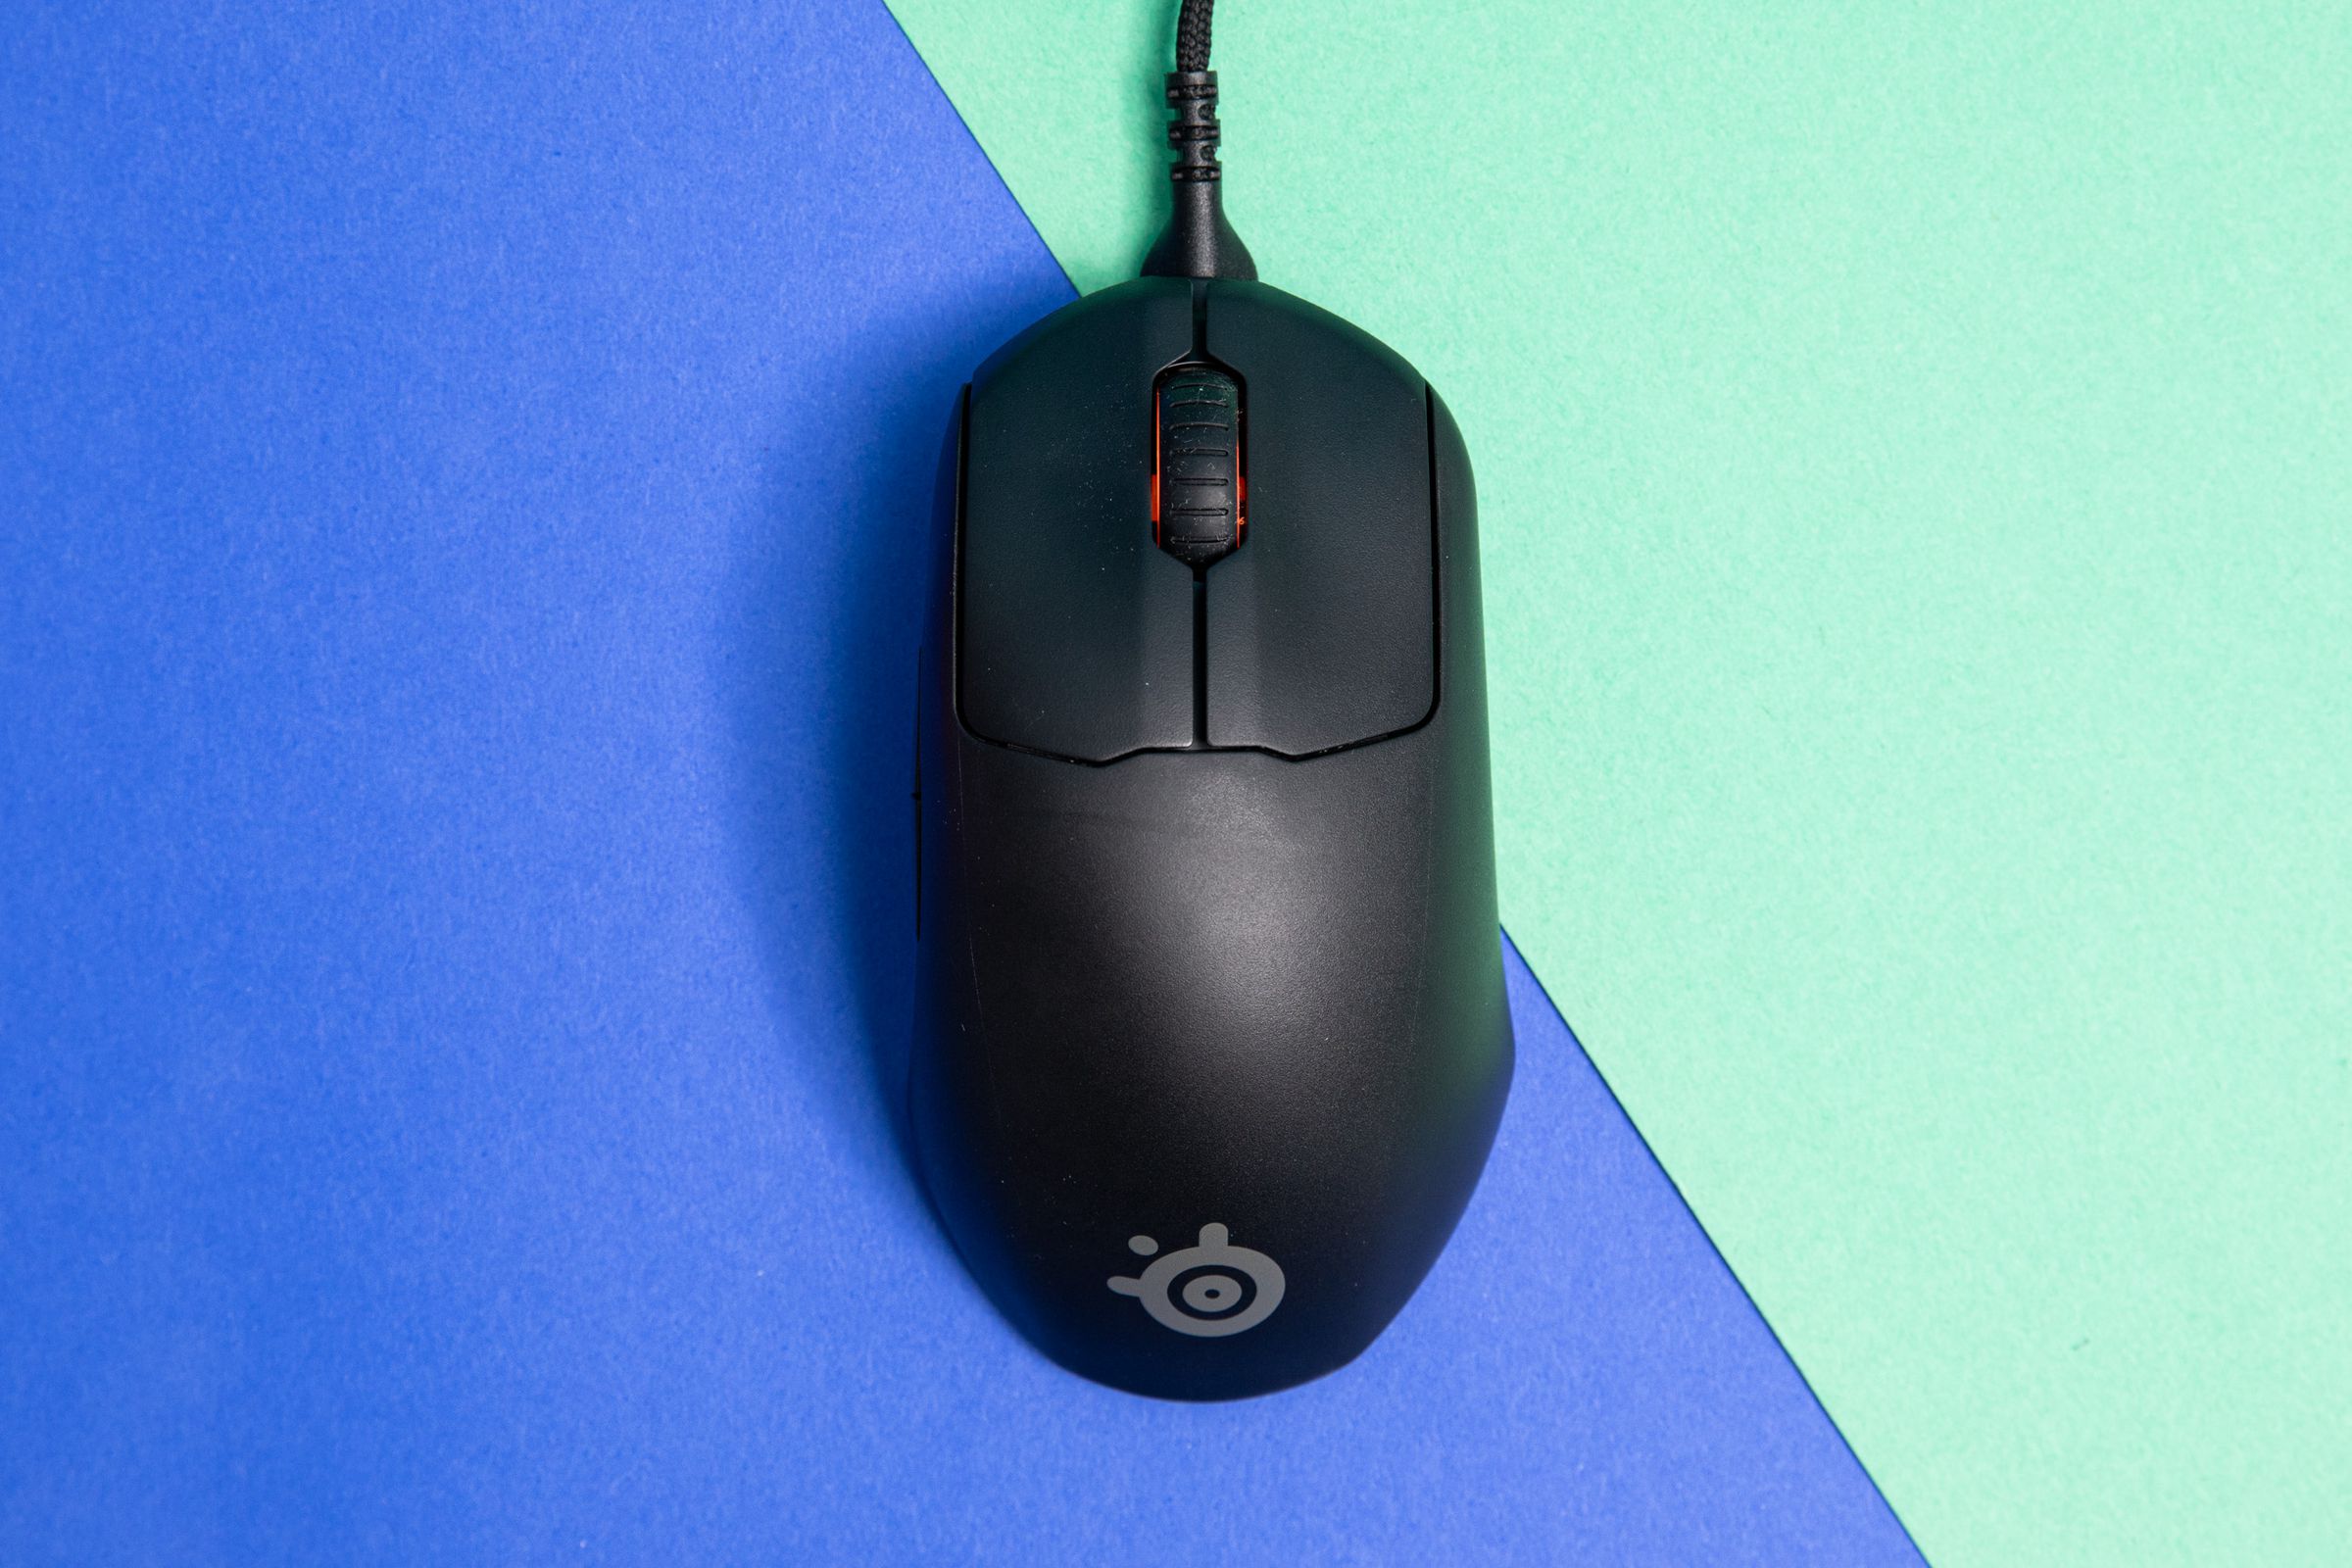 Top down shot of Steelseries Prime gaming mouse